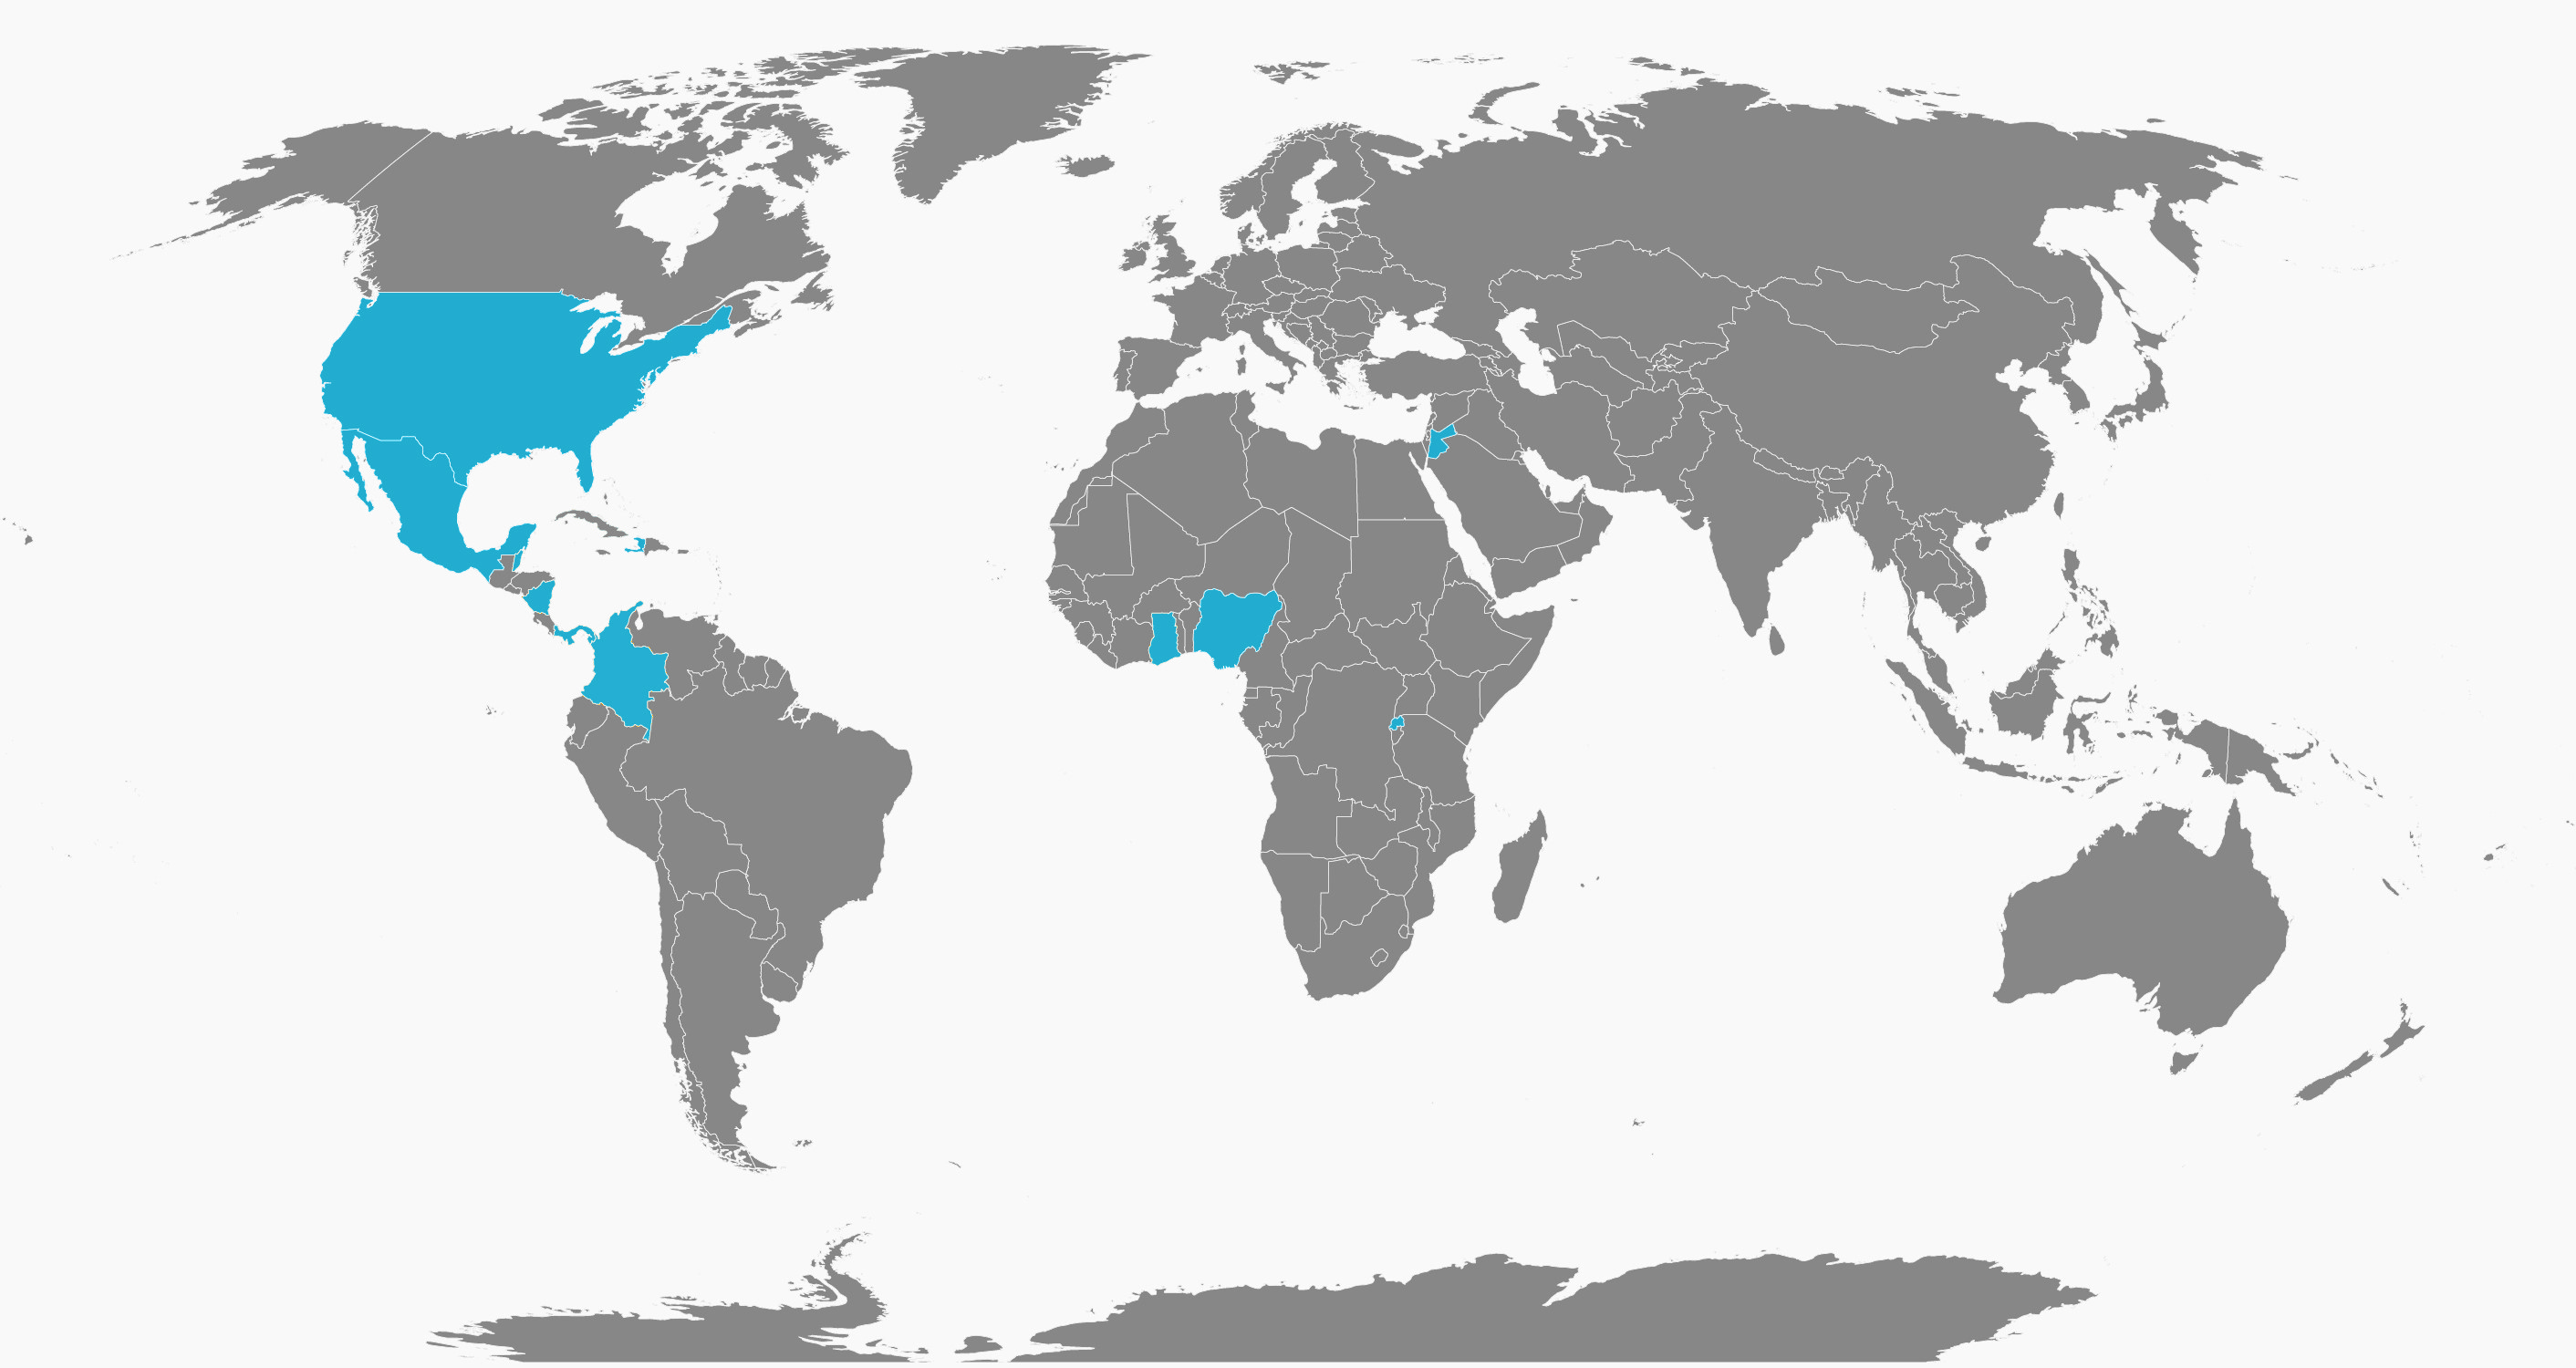 World map with highlighted partner countries listed below